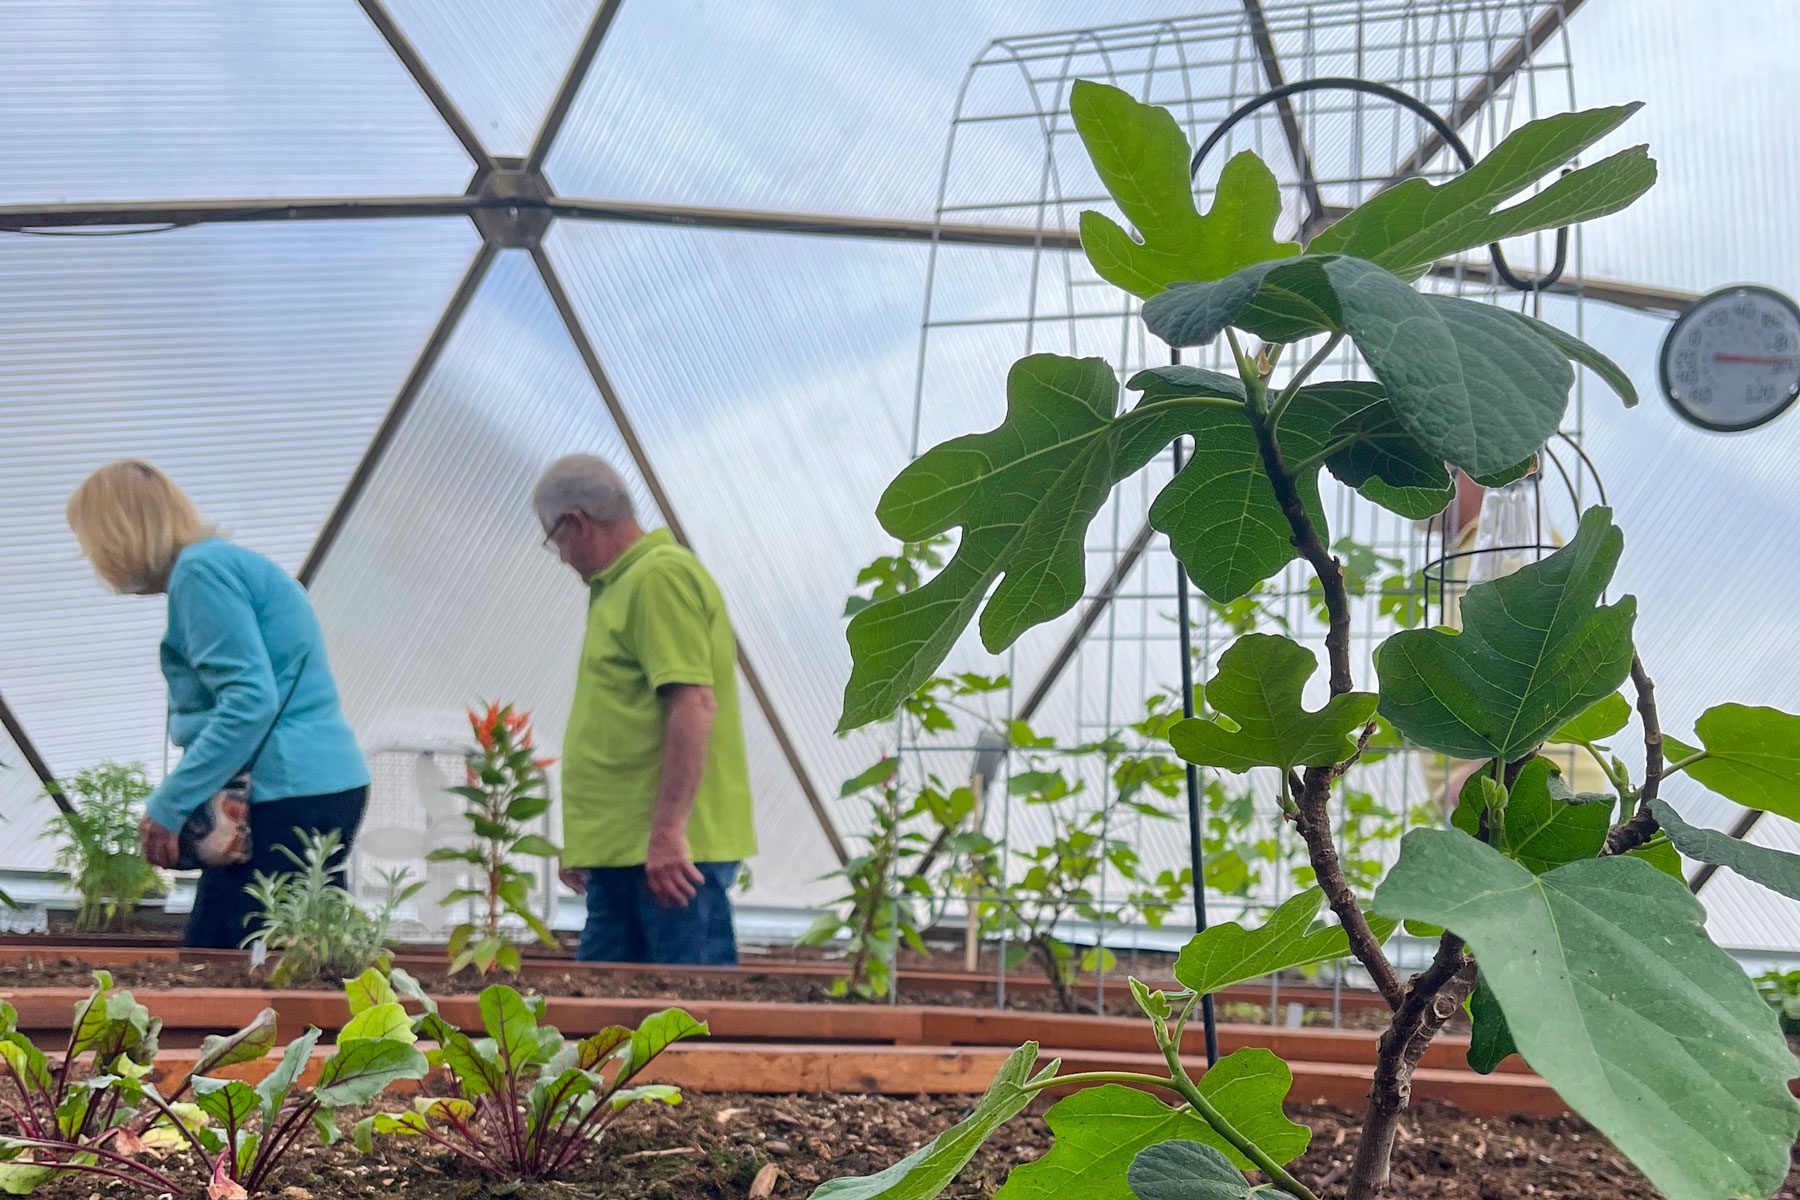 fig tree and garden beds in the foreground inside a growing dome, people in the background looking at the plants